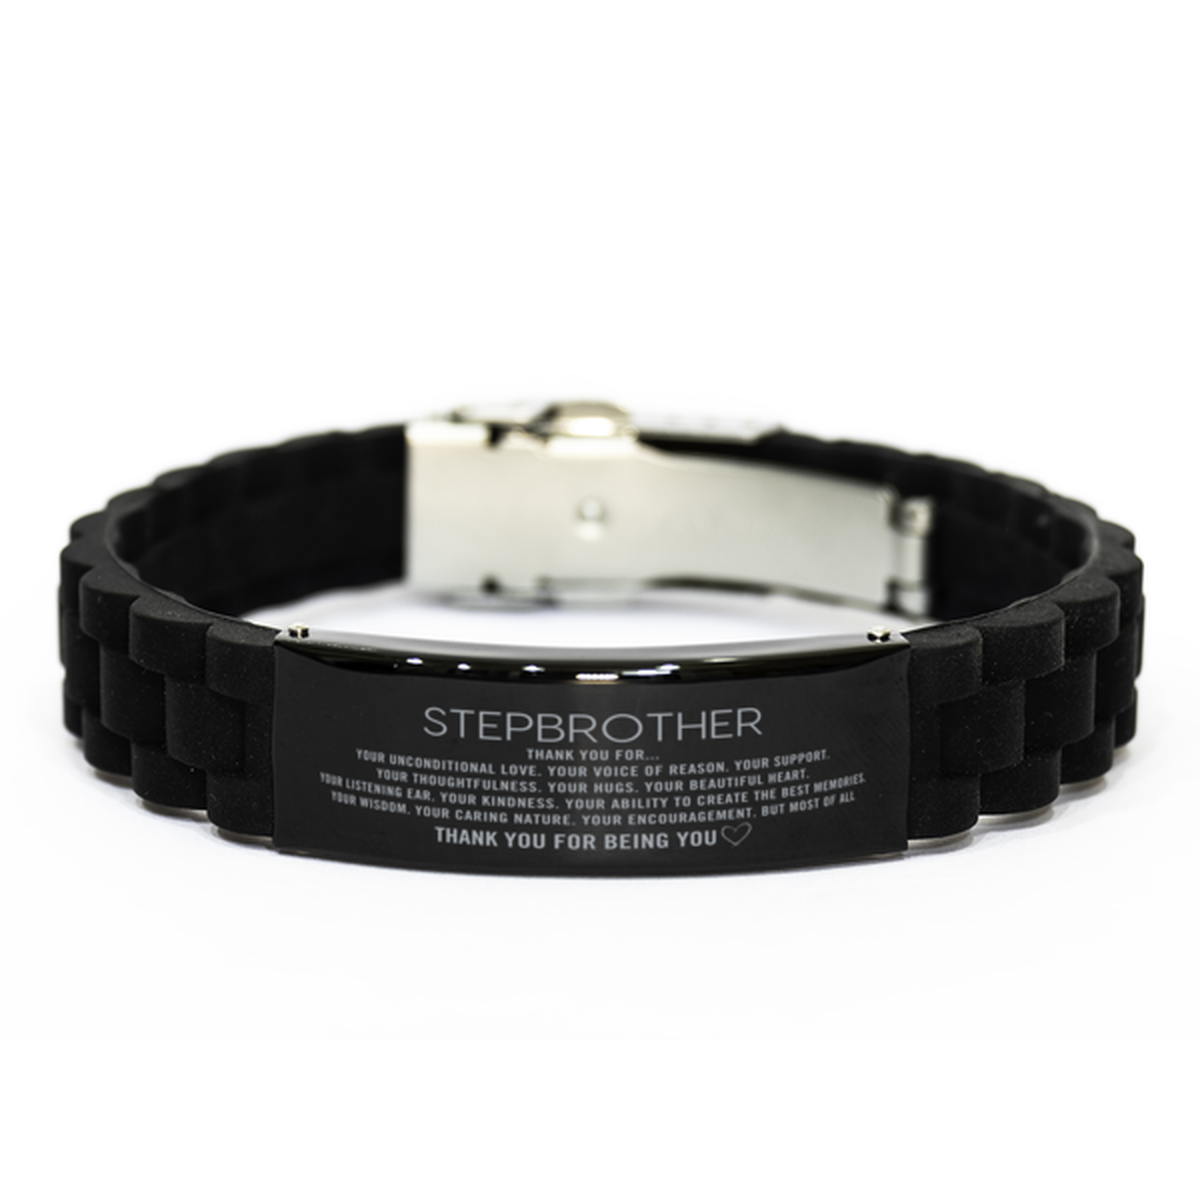 Stepbrother Black Glidelock Clasp Bracelet Custom, Engraved Gifts For Stepbrother Christmas Graduation Birthday Gifts for Men Women Stepbrother Thank you for Your unconditional love